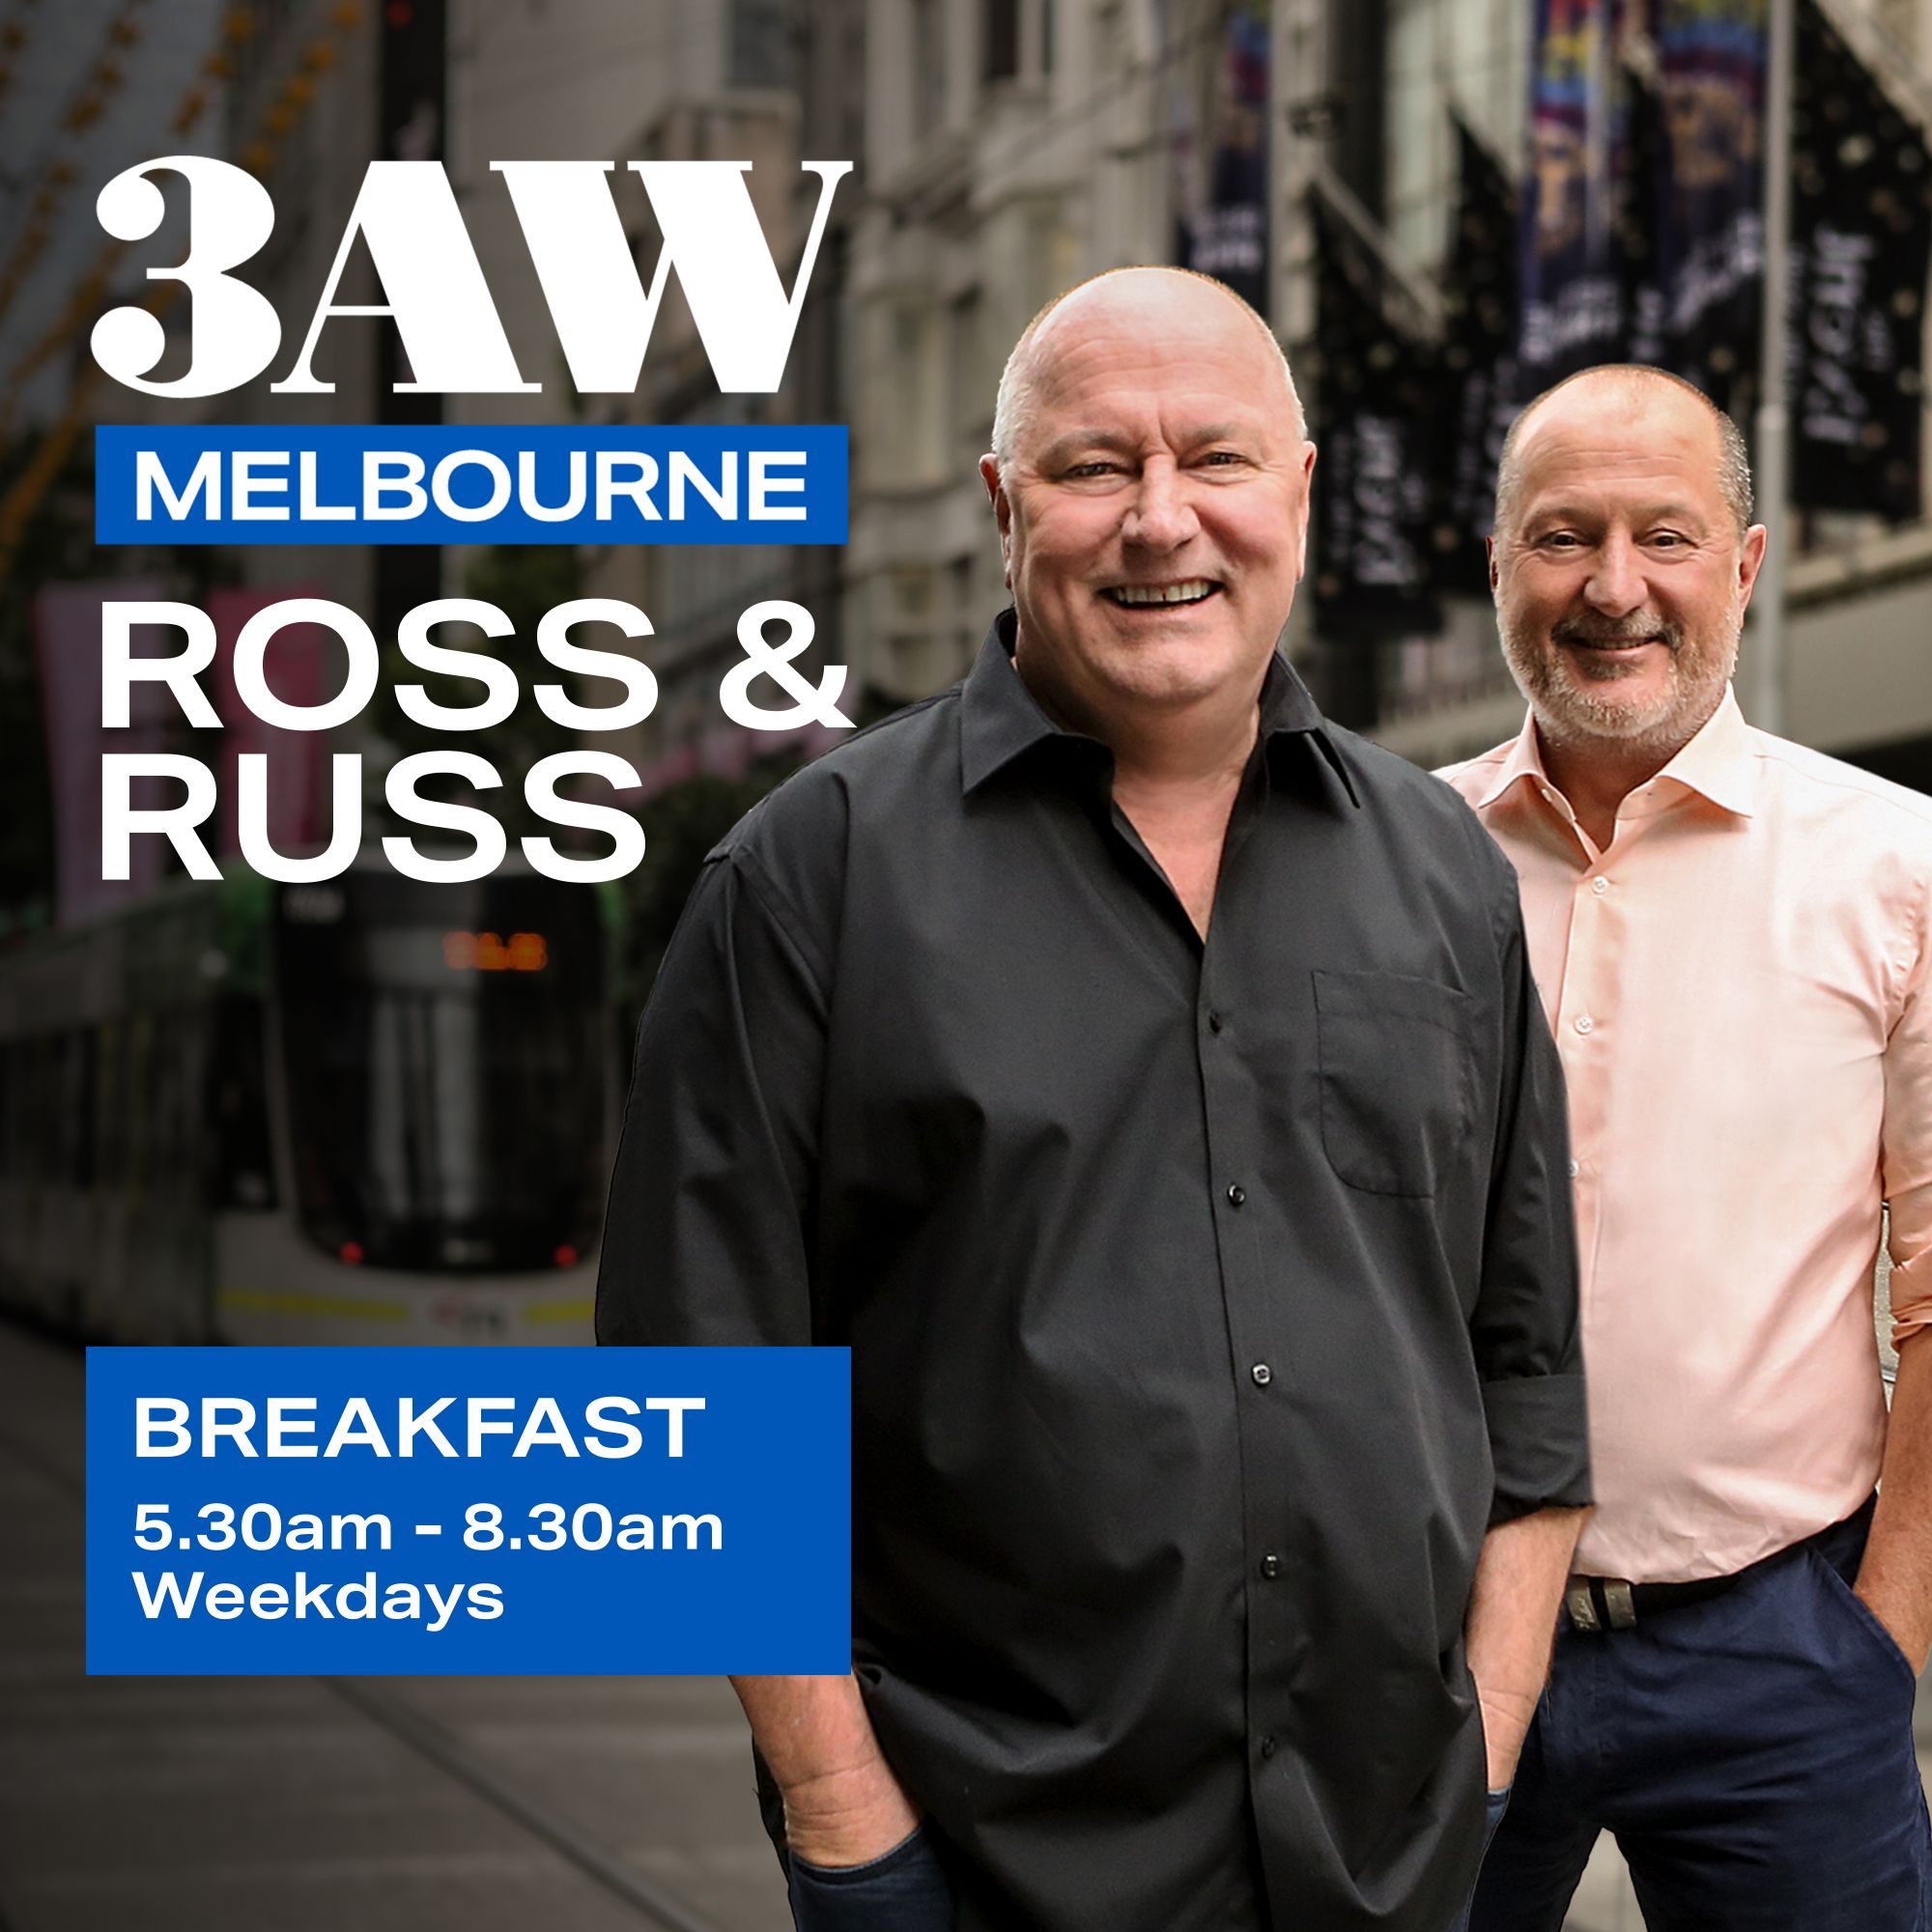 Glenn Robbins asks Ross and Russ 'what makes you feel good?'